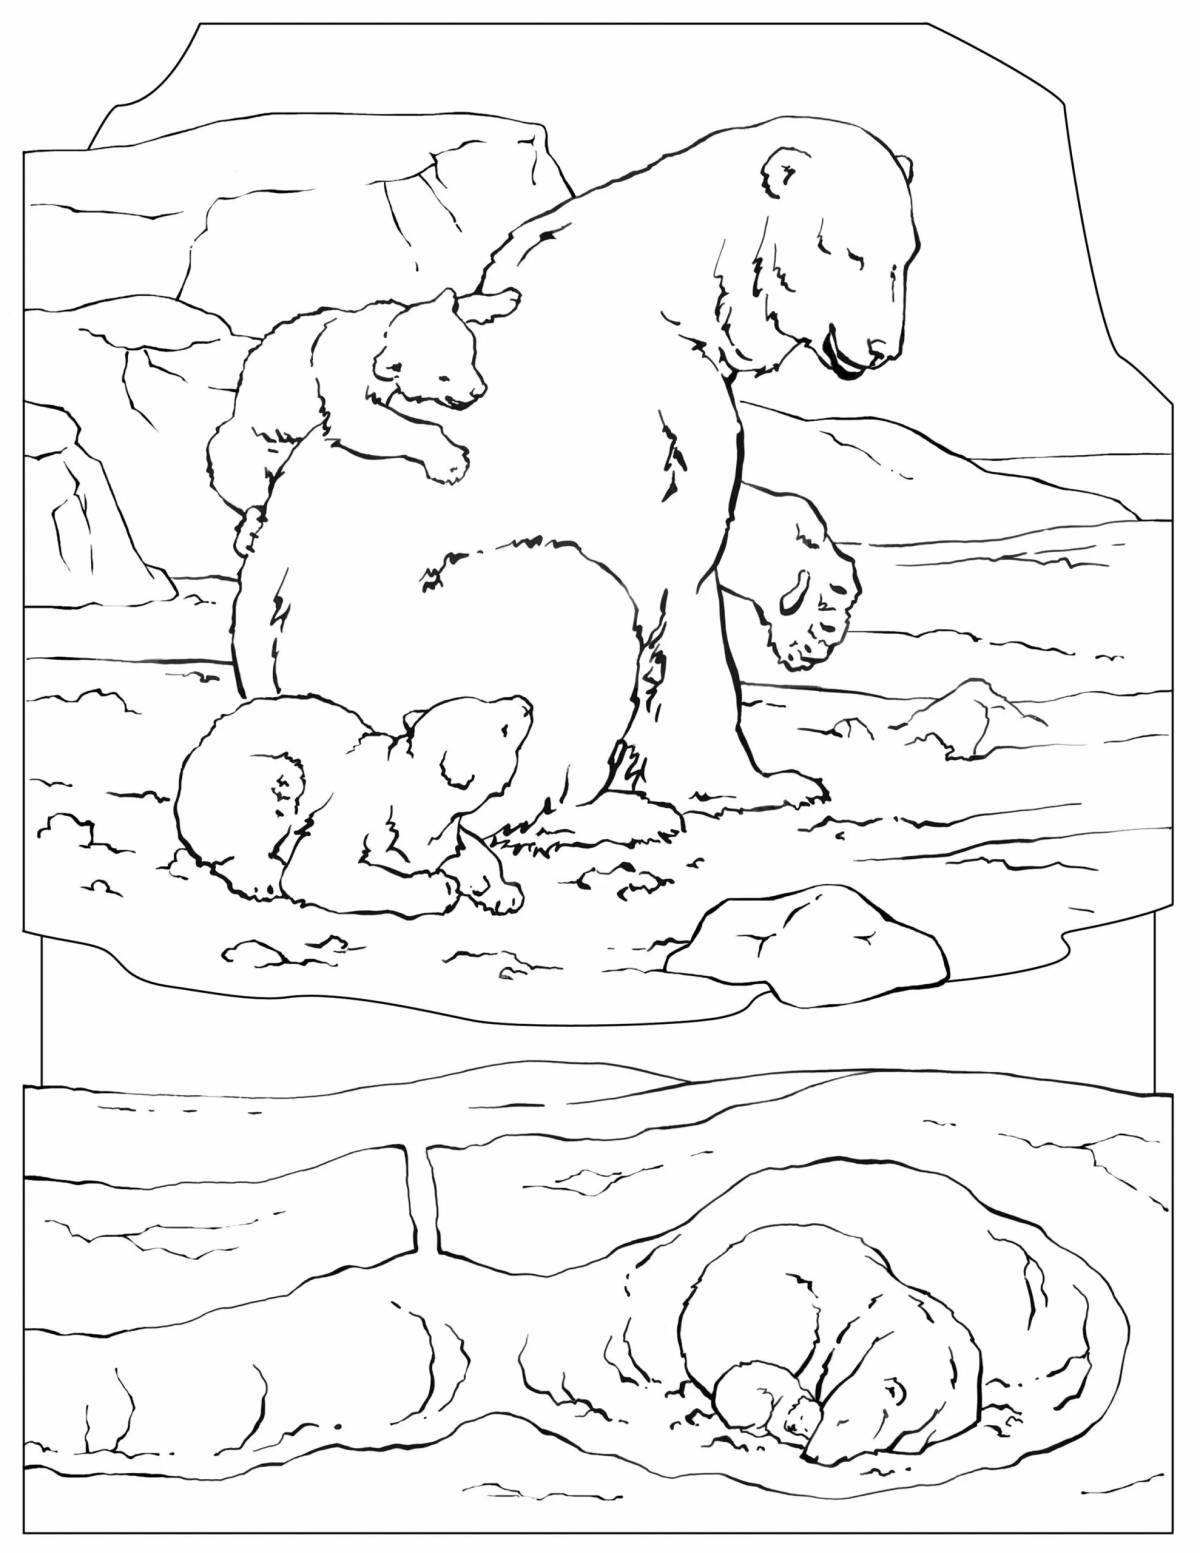 Calm northern bear coloring page